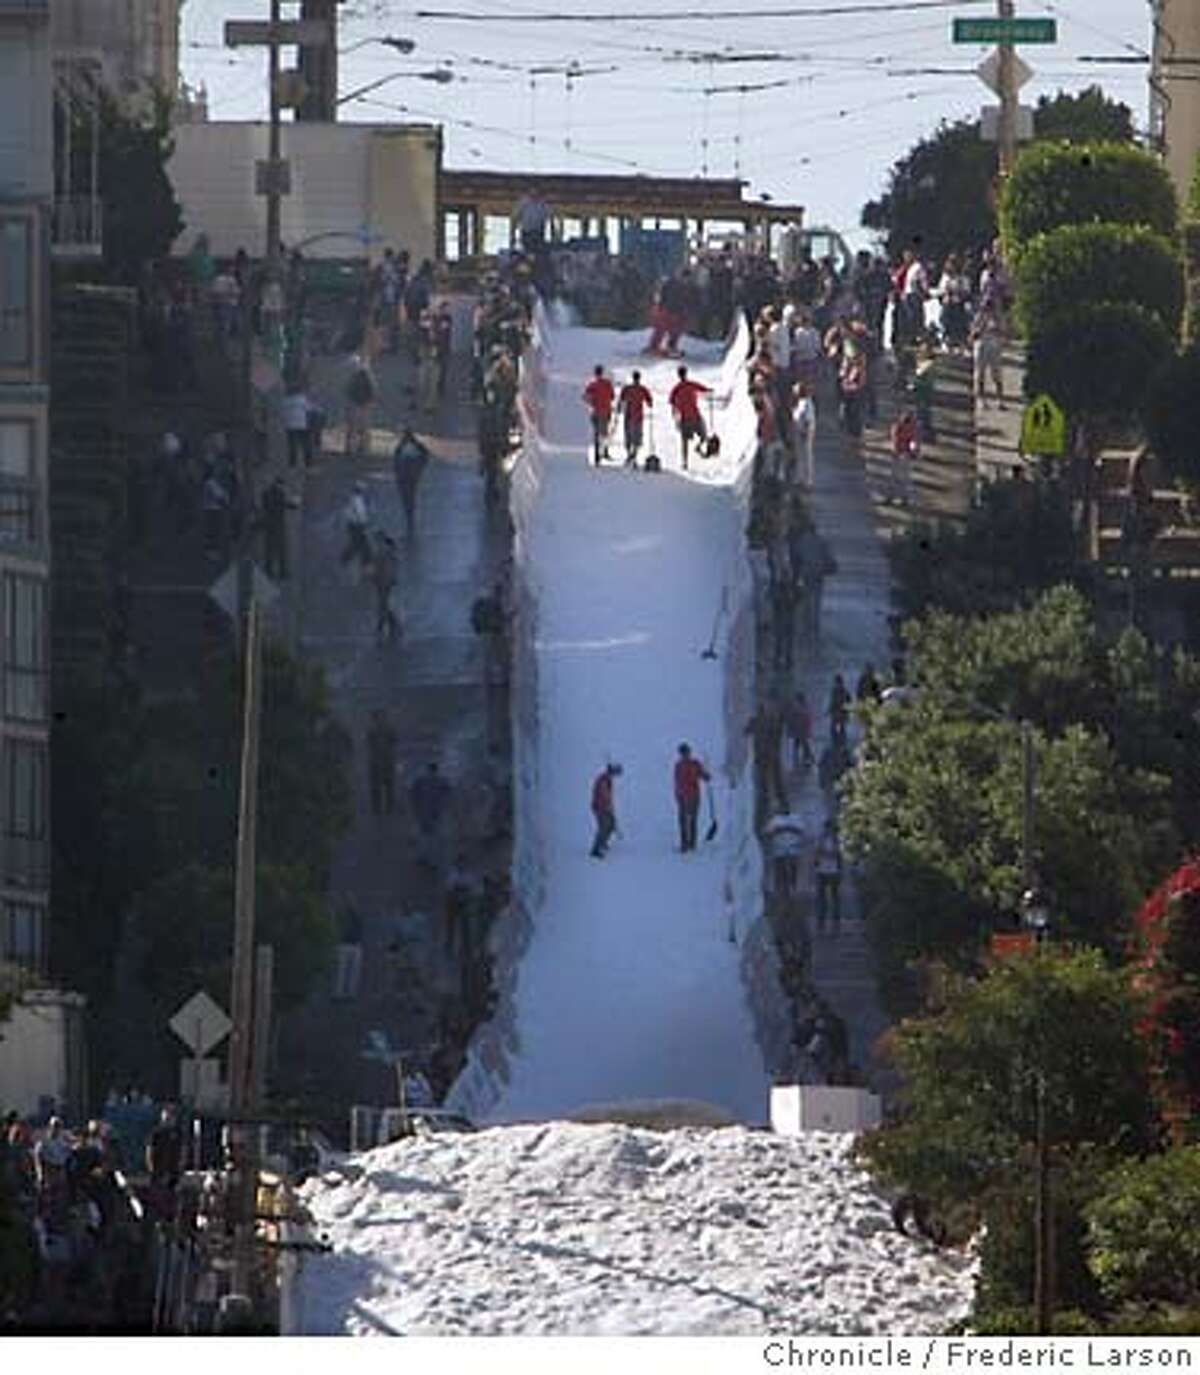 SKIJUMP13_0554_fl.jpg 10am -photo's of progress every 15 minutes from the foot of Filmore Street and Marina- Icer Air 2005, a promotional ski-jump contest took over an intersection of San Francisco's Fillmore Street and surrounding blocks in Pacific Heights Wednesday afternoon. And residents who live near the section of the Fillmore Street hill where the jumpers will be flying Thursday -- and who objected to the issuing of city permits for the event because of the disruption it would cause and financial risk the city would face -- are angrier than before. Snow blowing begins at 7am; practice at 10am; the Jumps happen from noon to 4pm...ry Photographer:� 9/29/05 San Francisco CA Frederic Larson The San Francisco Chronicle